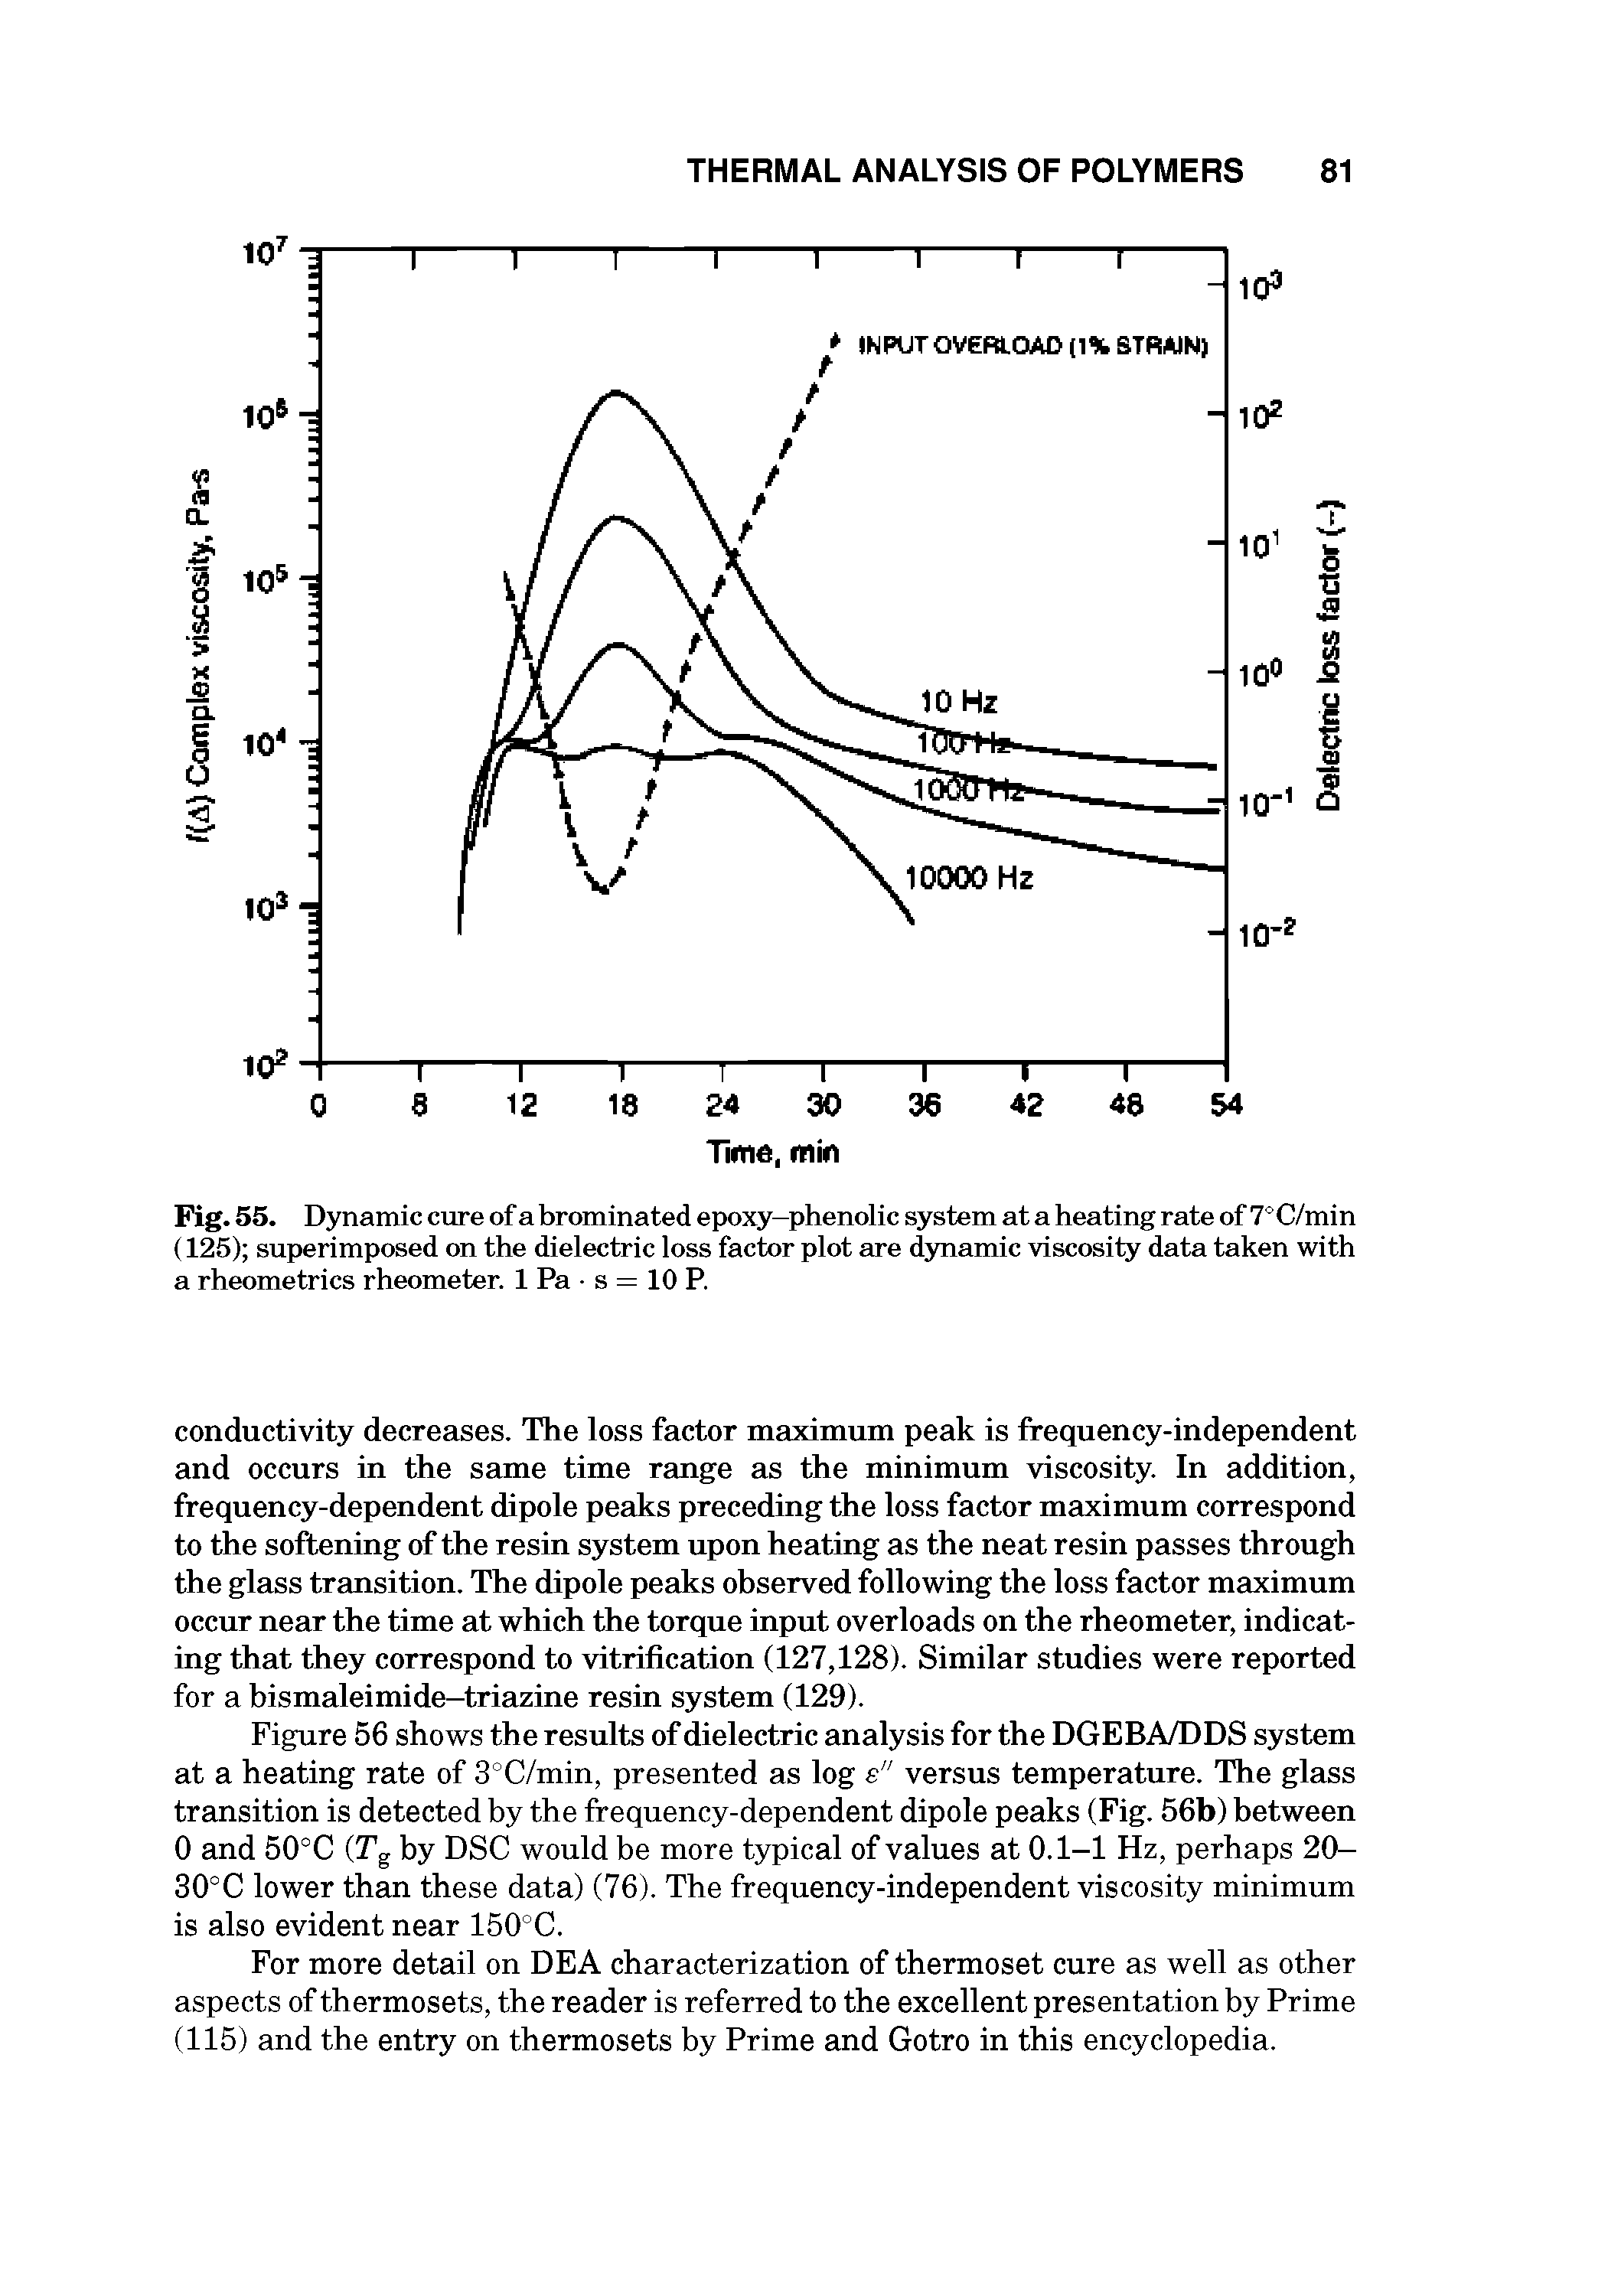 Fig. 55. Dynamic cure of a brominated epoxy-phenolic system at a heating rate of 7 C/min (125) superimposed on the dielectric loss factor plot are djmamic viscosity data taken with a rheometrics rheometer. 1 Pa s = 10 P.